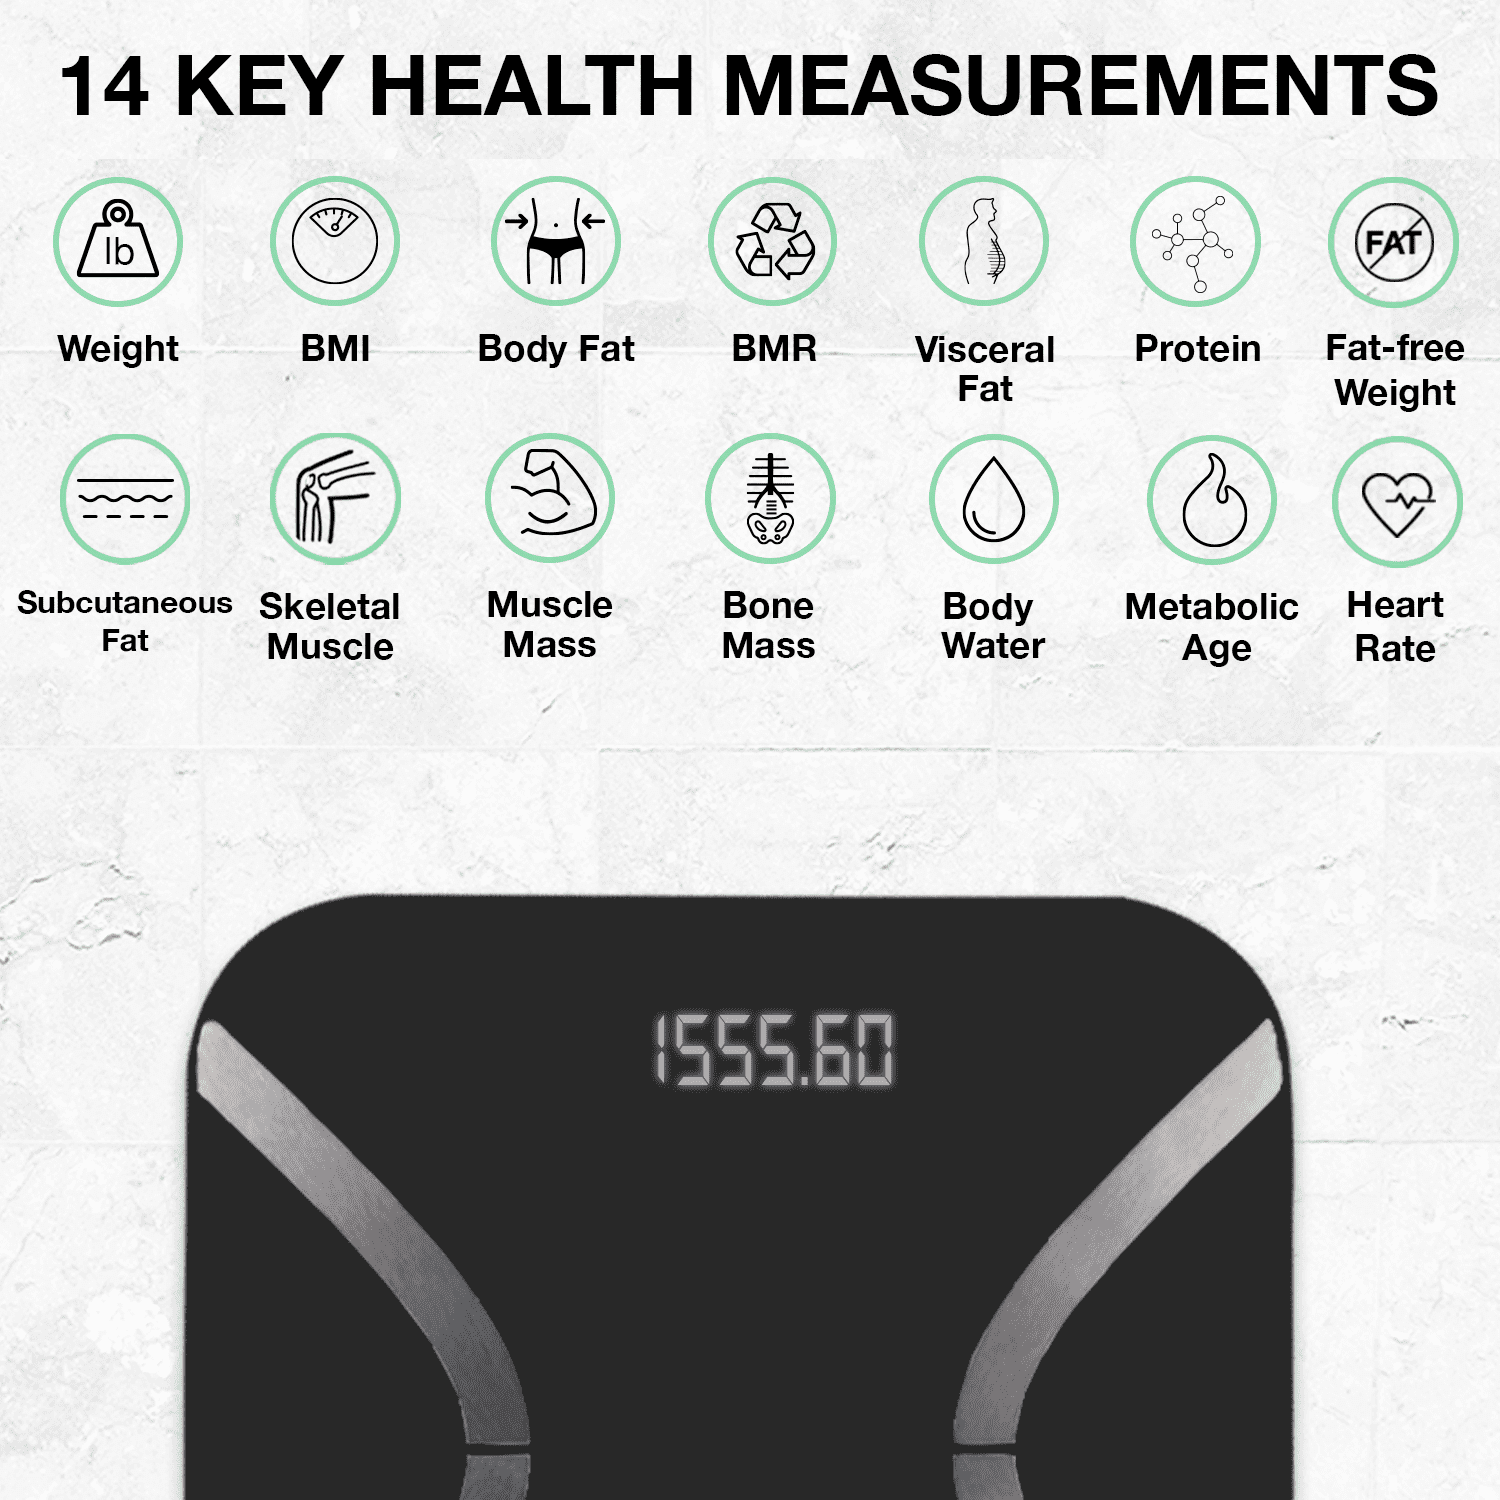  KOREHEALTH Korescale G2 - Smart Scale for Body Weight, Home  Bathroom Scale Tracks BMI, Muscle Mass, Body Liquids and More, Weight  Scale with Bluetooth App